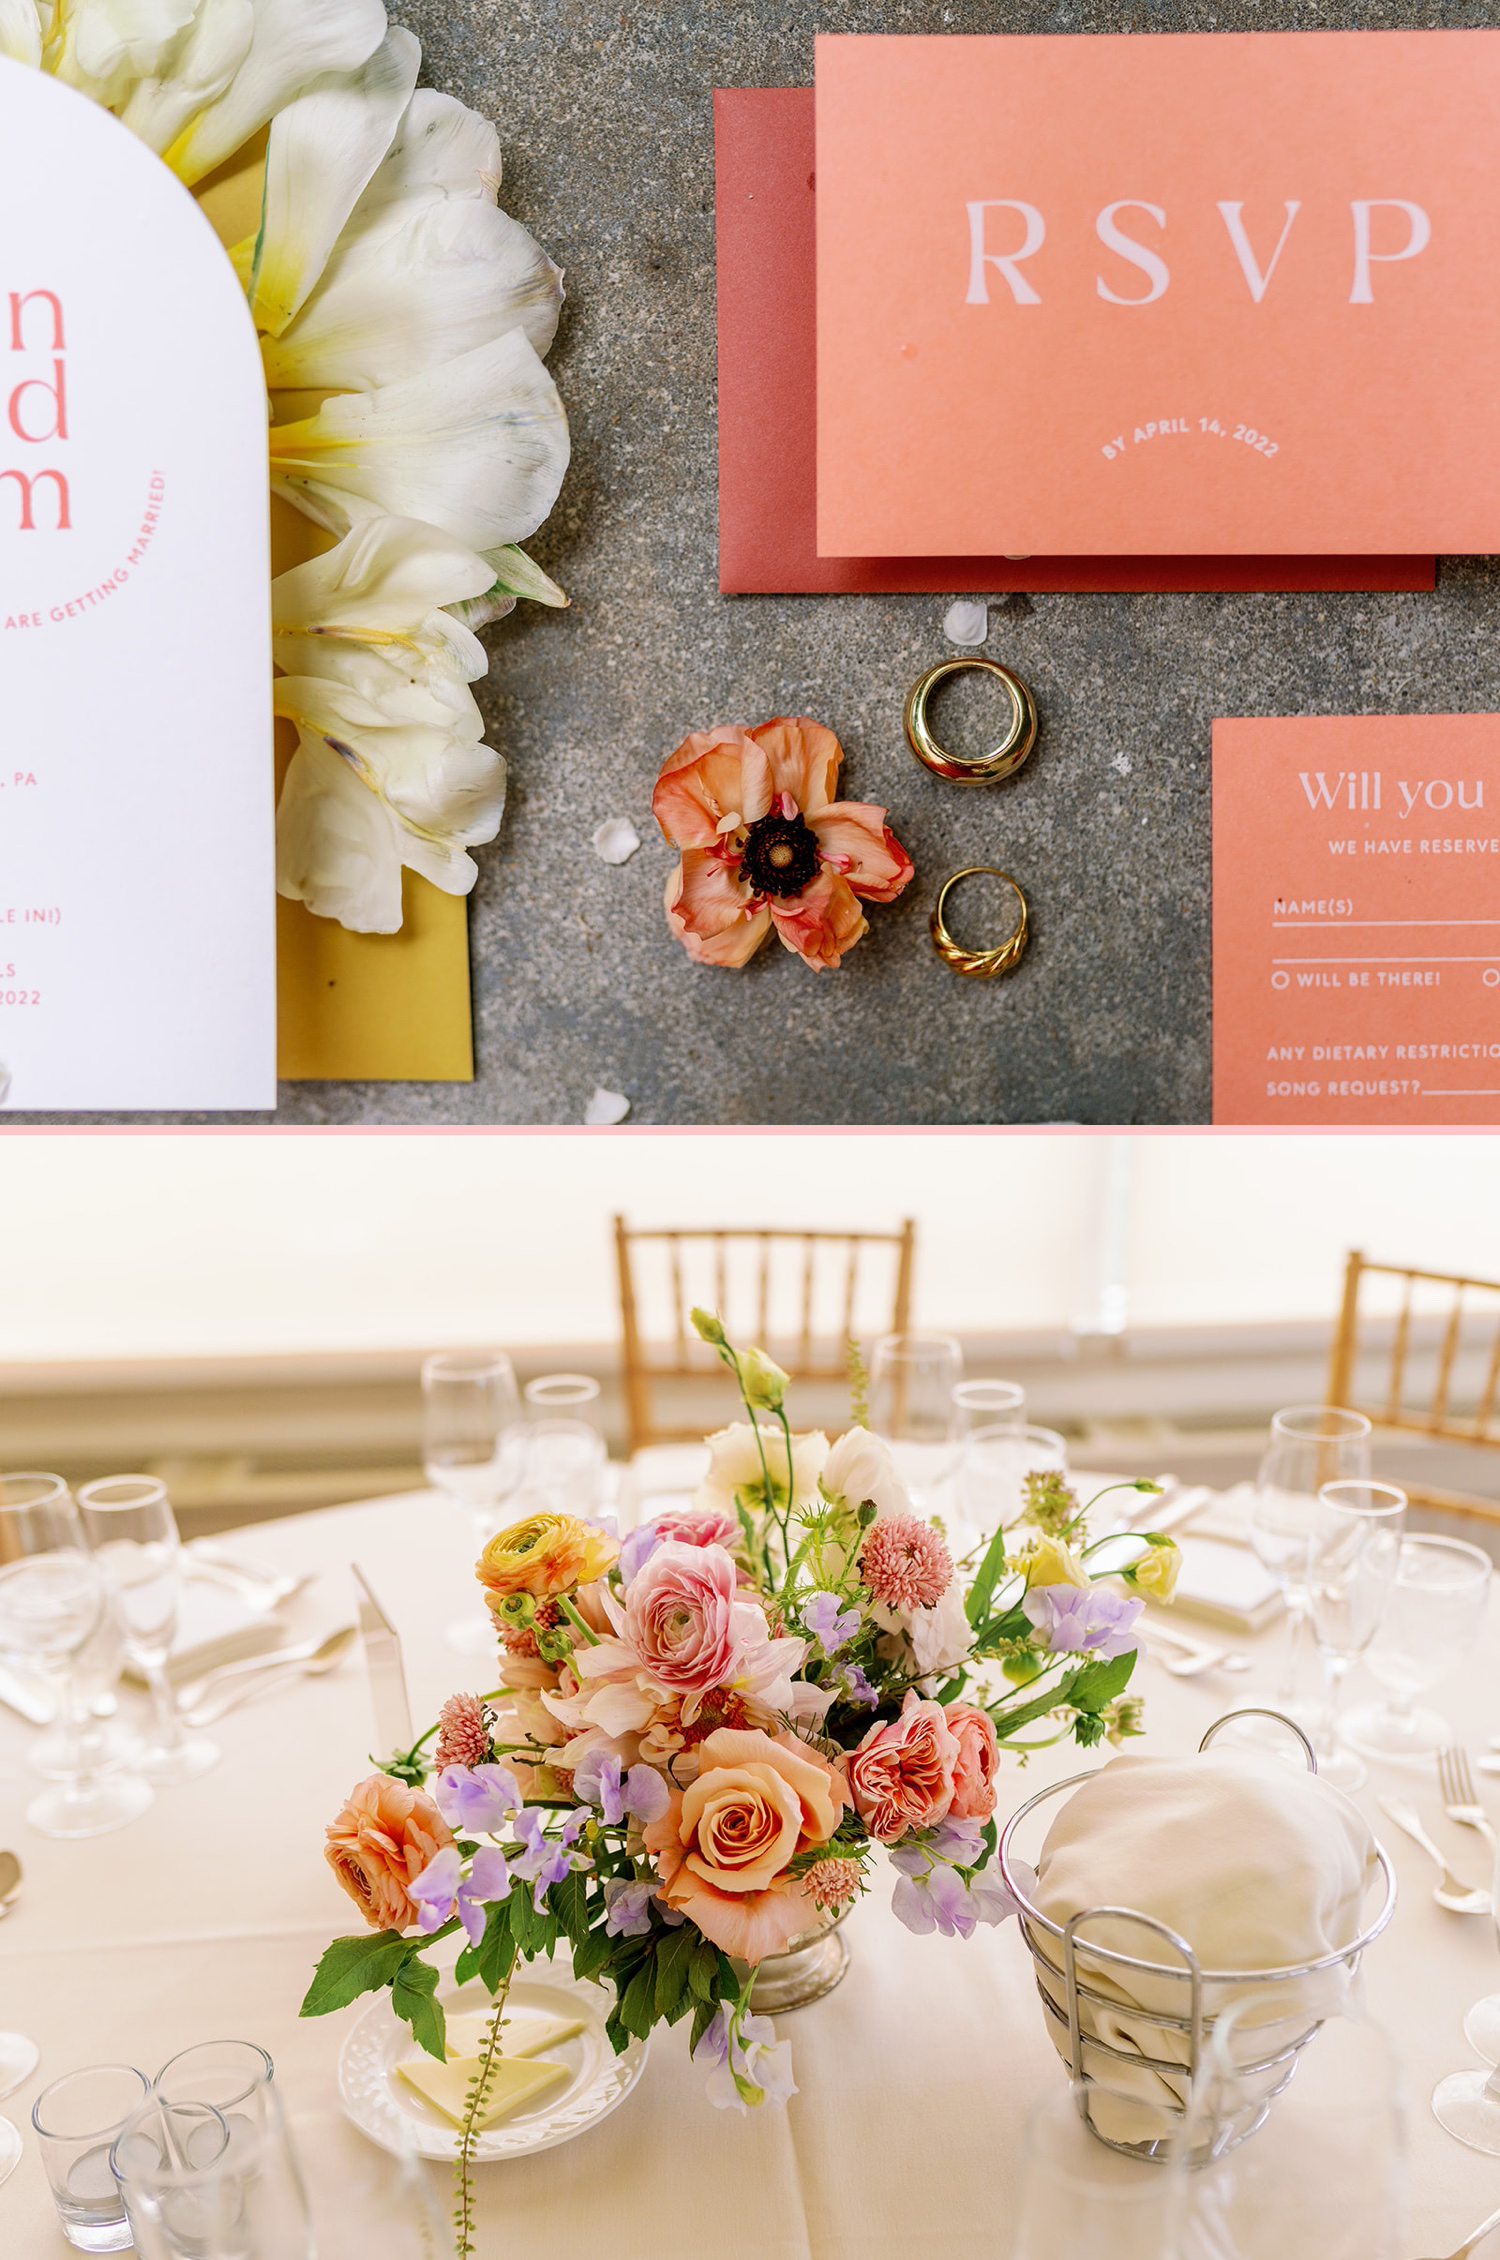 Wedding Details, invitation and flowers